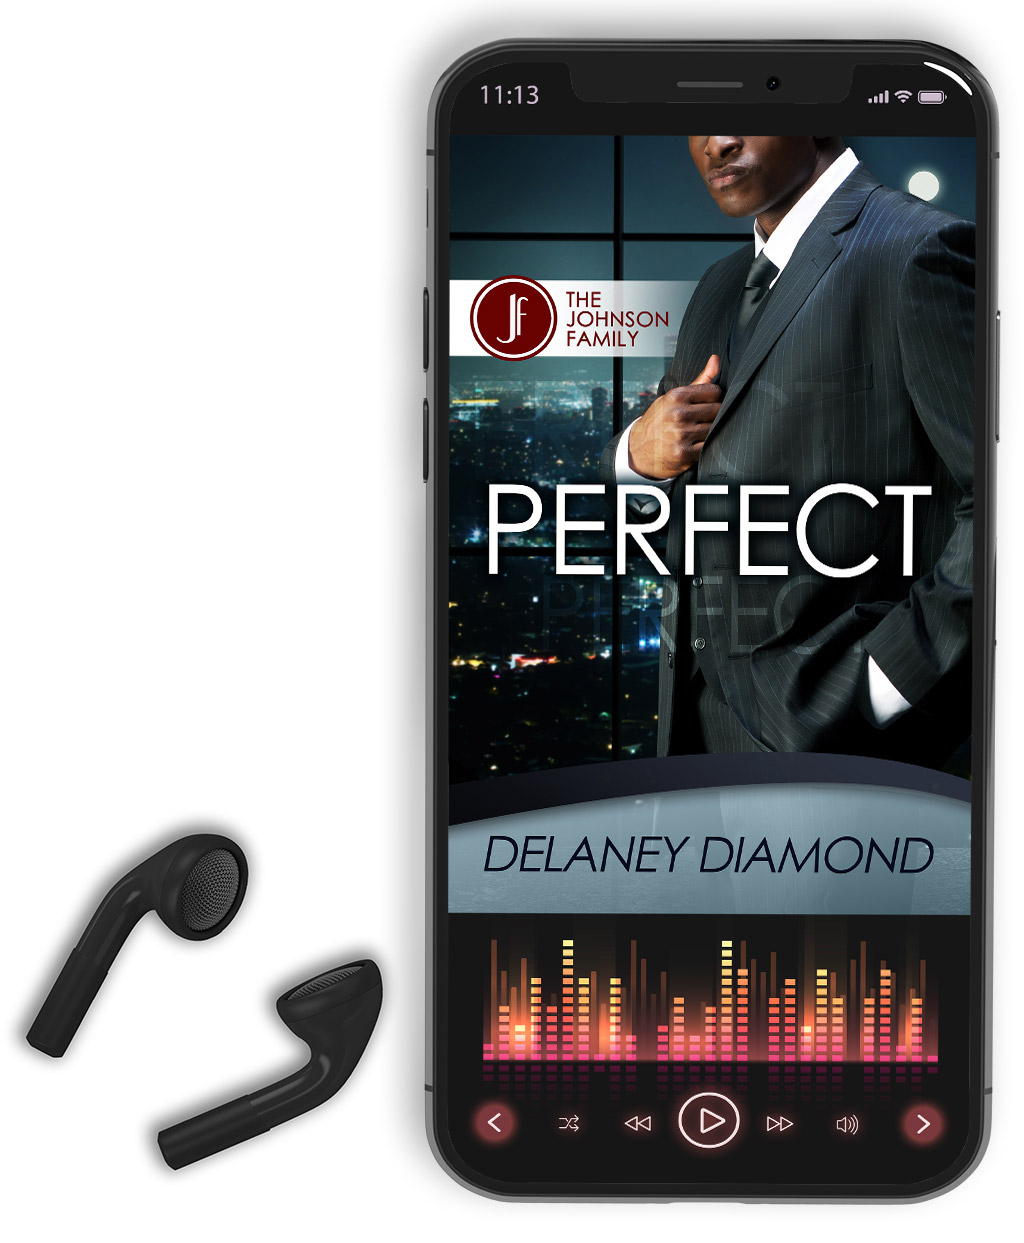 Perfect - Johnson family series #2 - Audiobook by Delaney Diamond